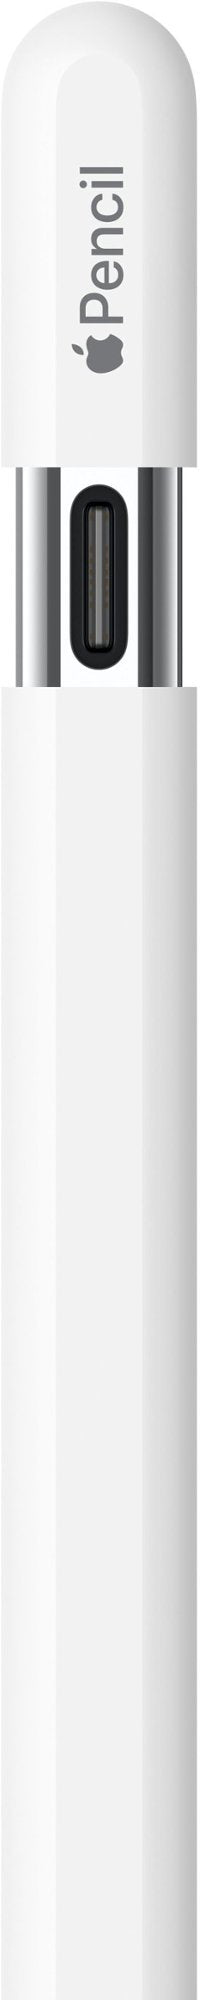 Apple Pencil (USB-C) - White (Pre-Owned)